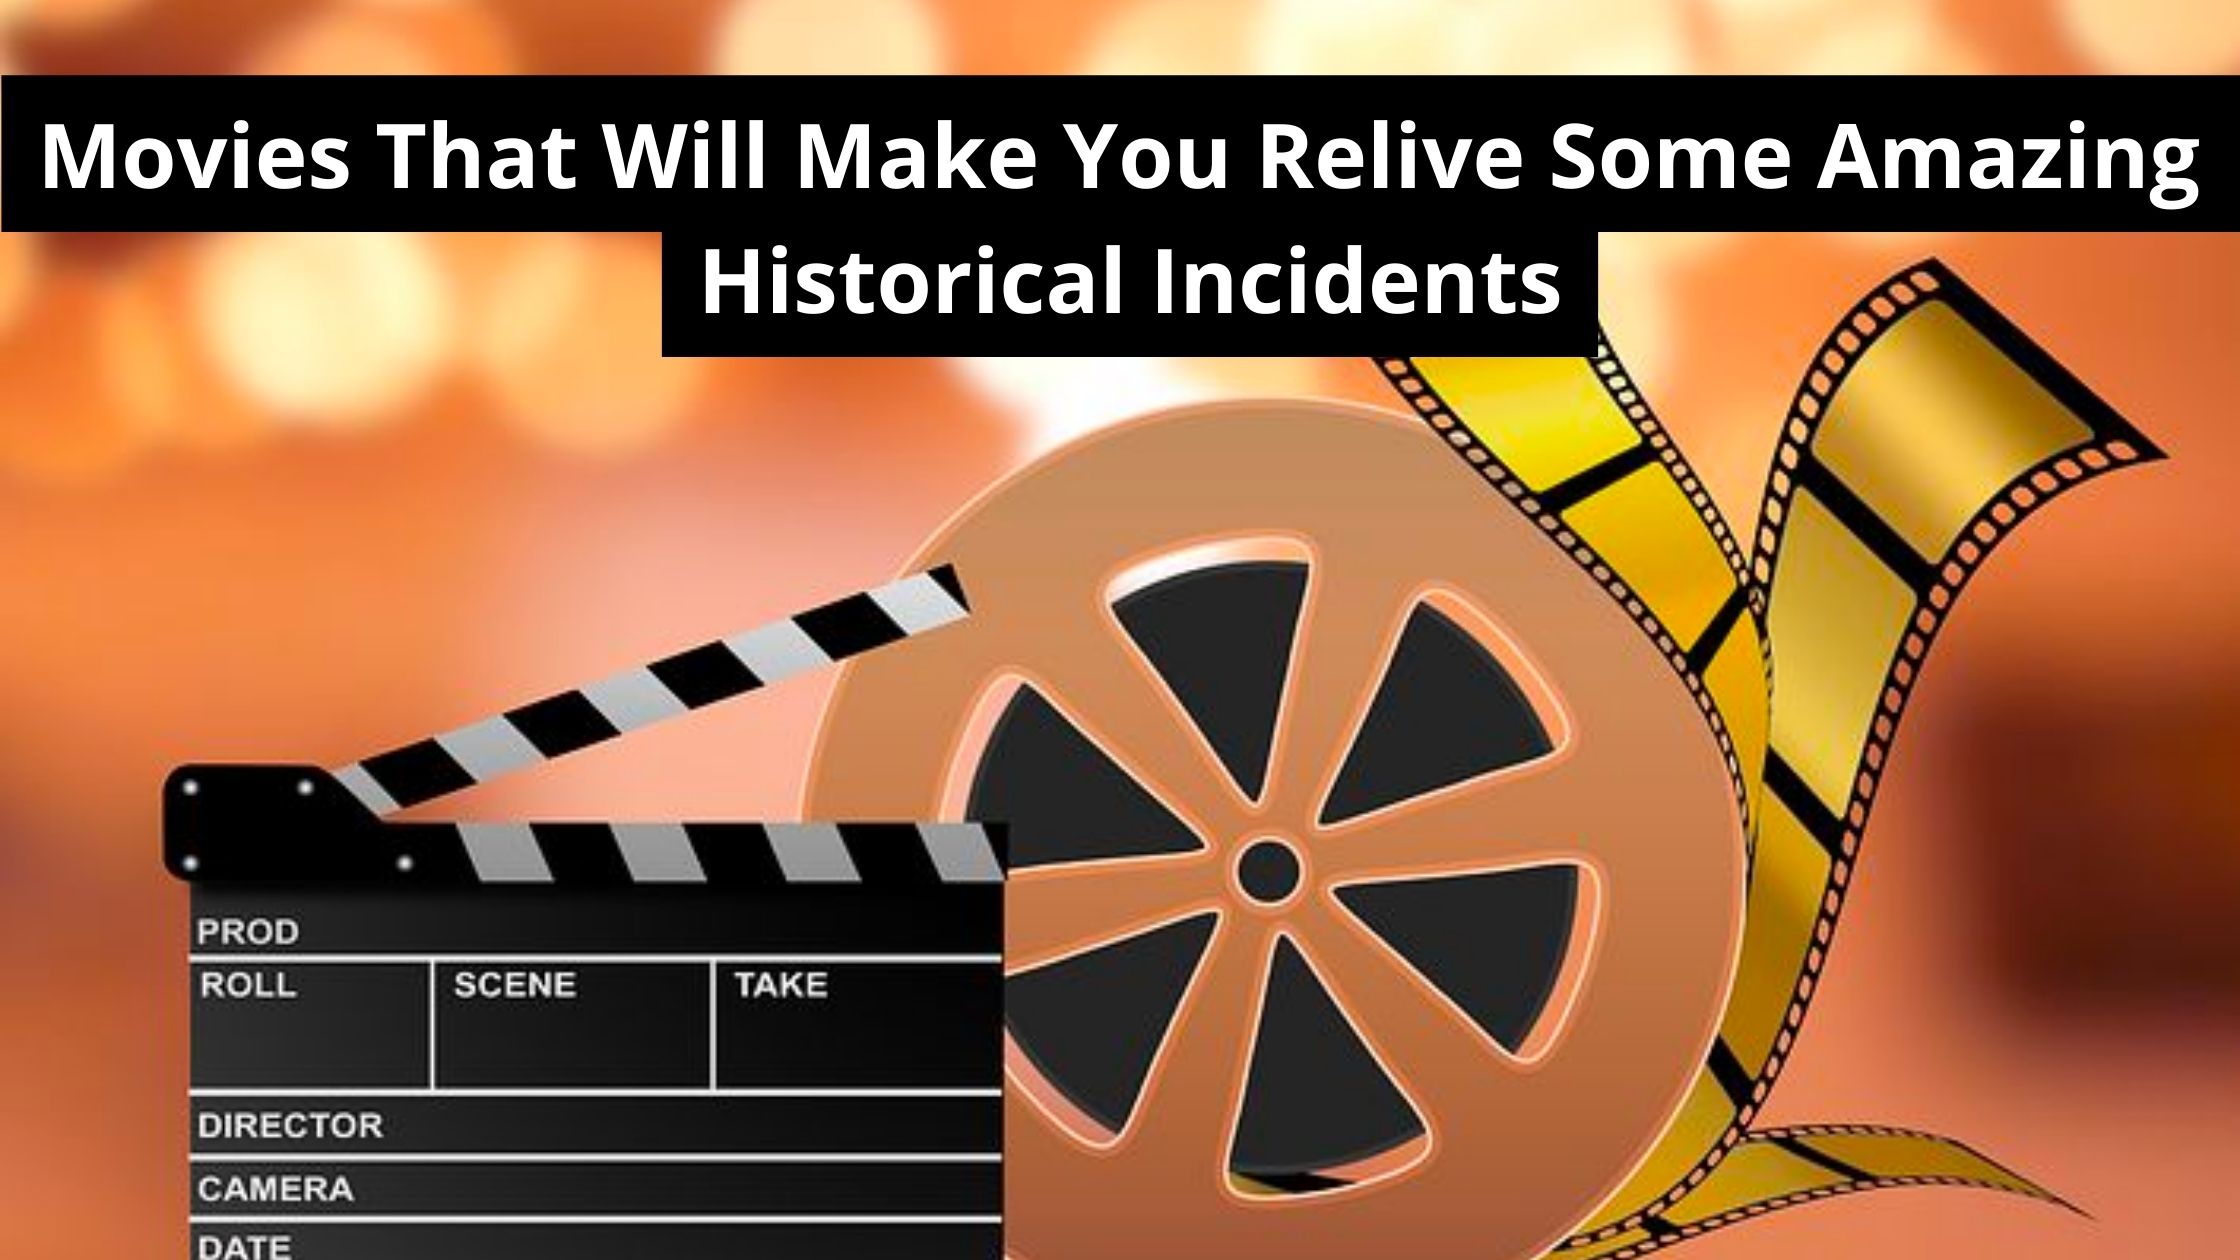 <strong>Movies That Will Make You Relive Some Amazing Historical Incidents</strong>